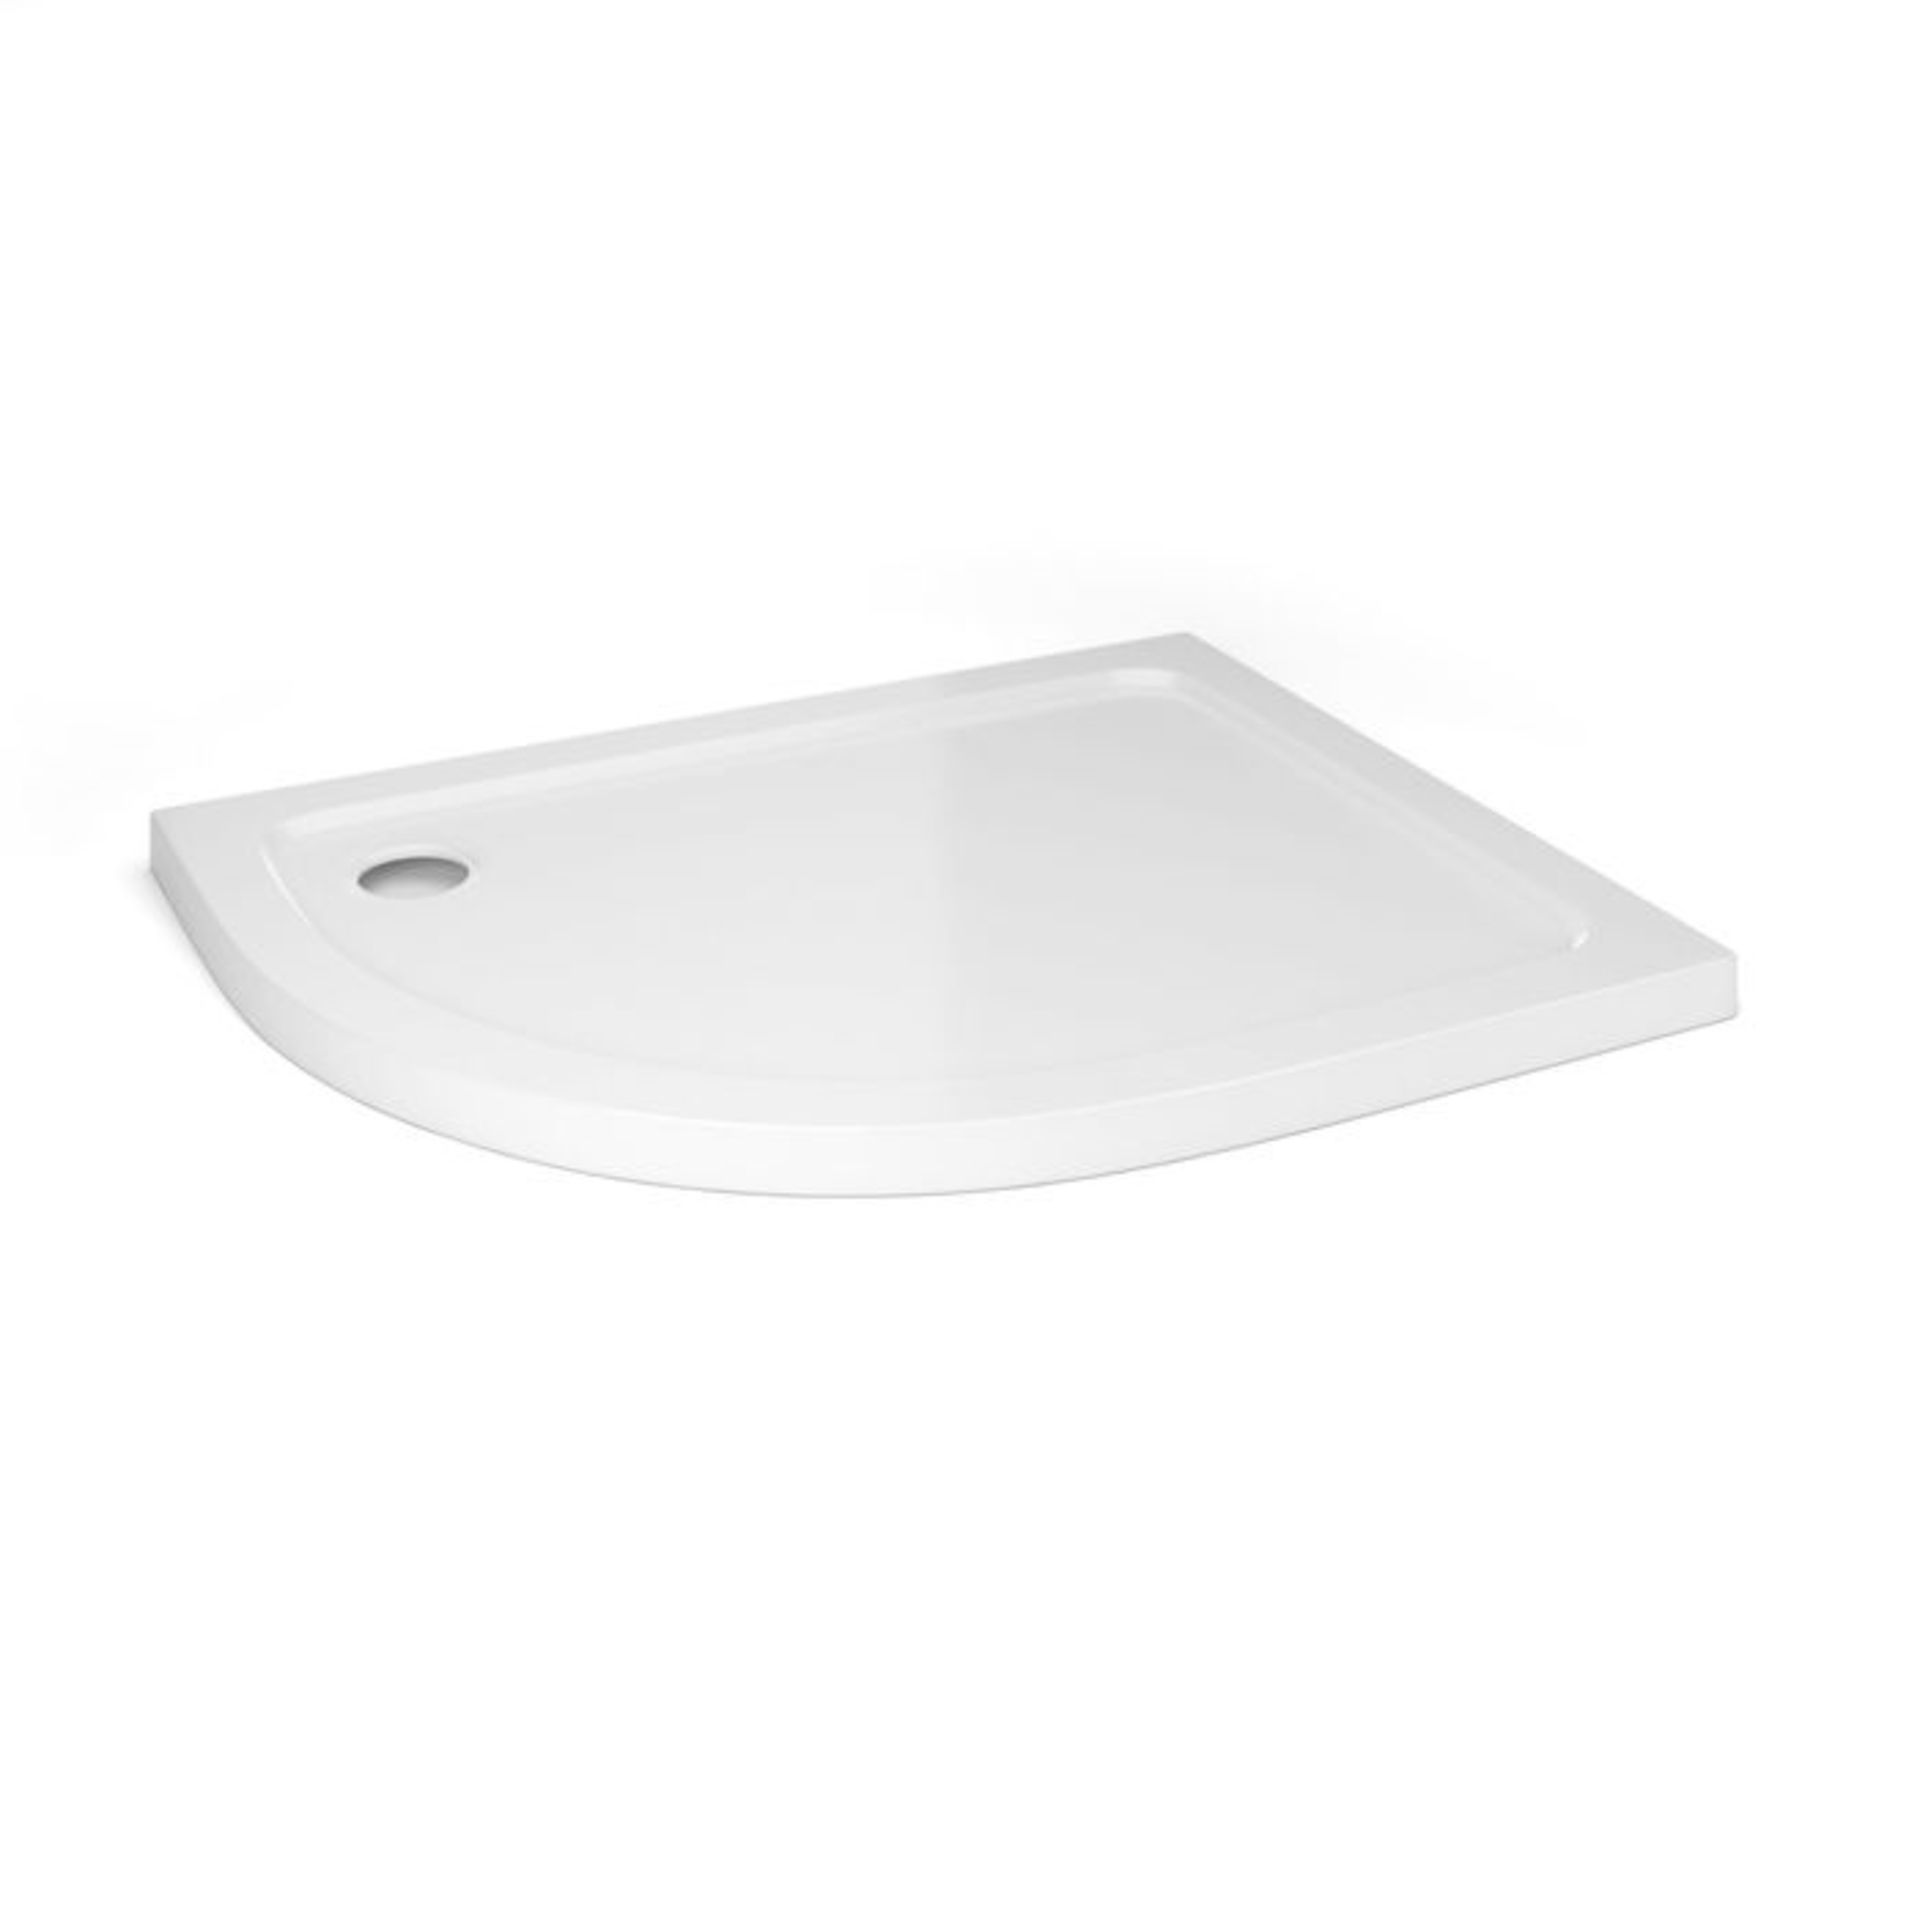 (DW24) 1000x800mm Offset Quadrant Ultra Slim Stone Shower Tray - Left. Constructed from acryli...( - Image 2 of 2